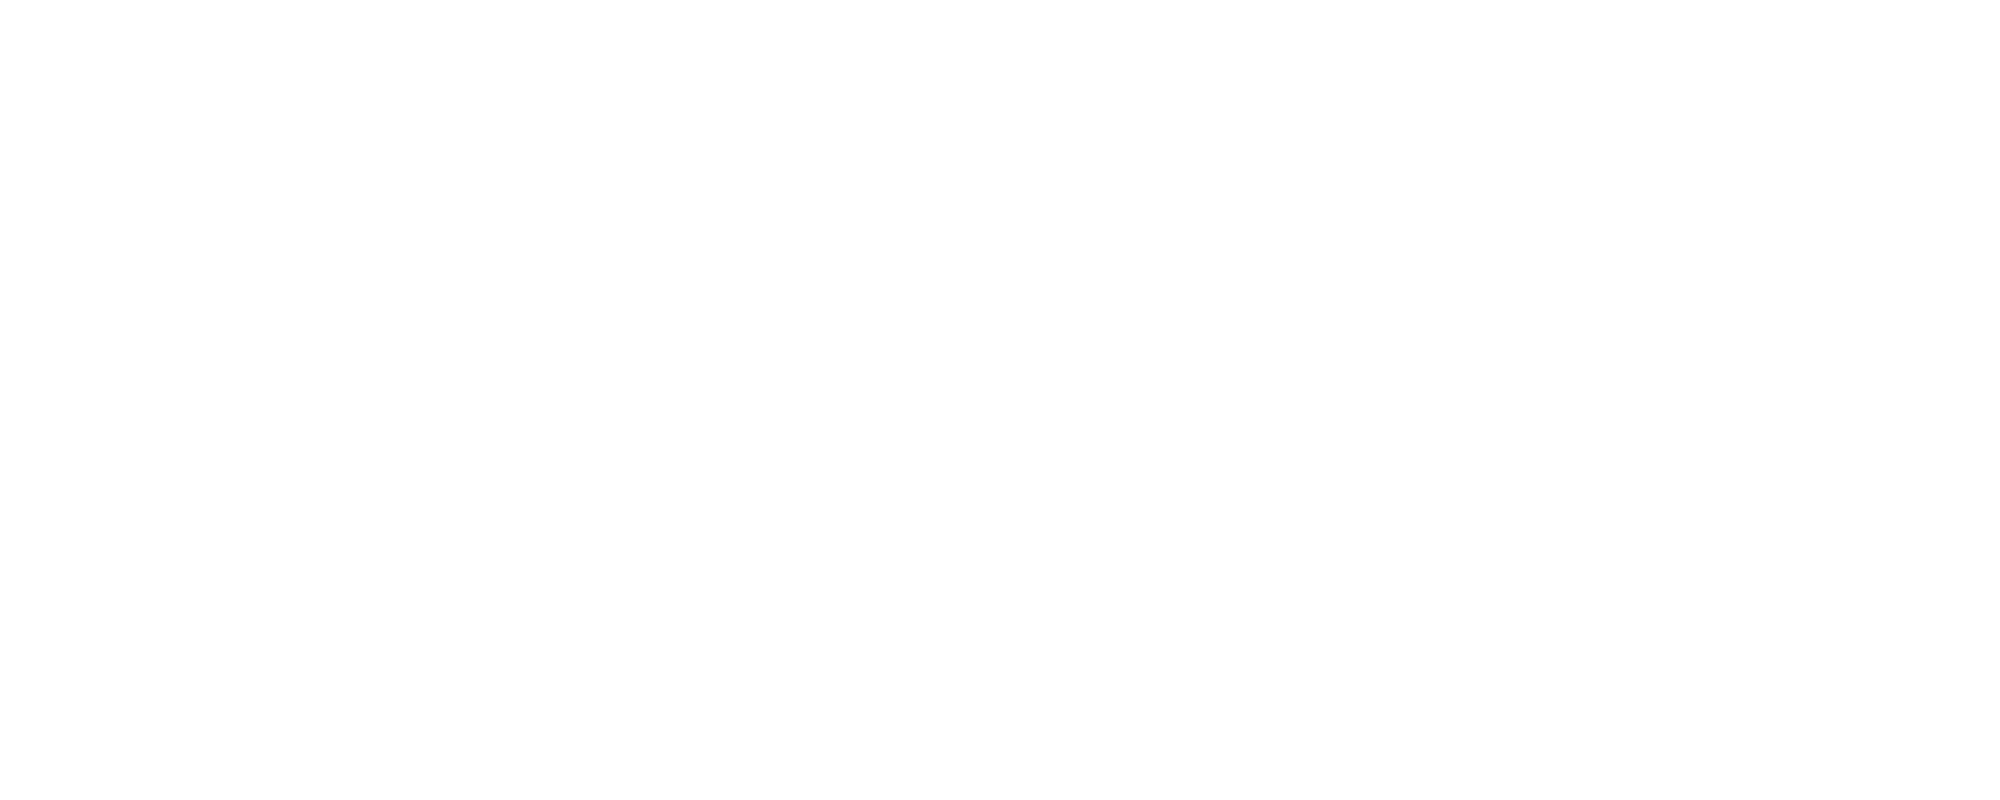 OVATION TV STATEMENT ON AEG PRESENTS PRO-VACCINATION POLICY